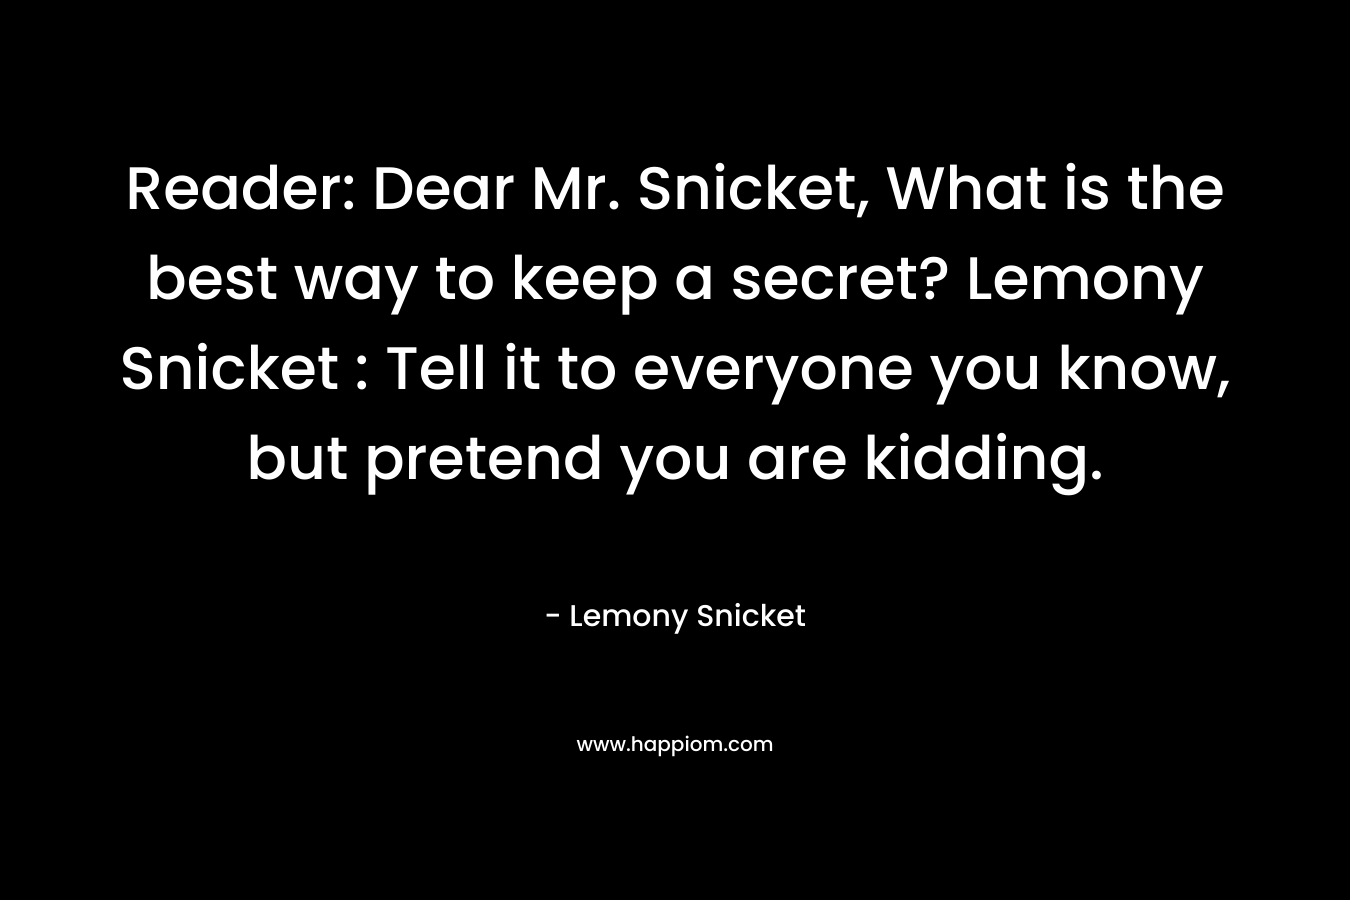 Reader: Dear Mr. Snicket, What is the best way to keep a secret? Lemony Snicket : Tell it to everyone you know, but pretend you are kidding. – Lemony Snicket